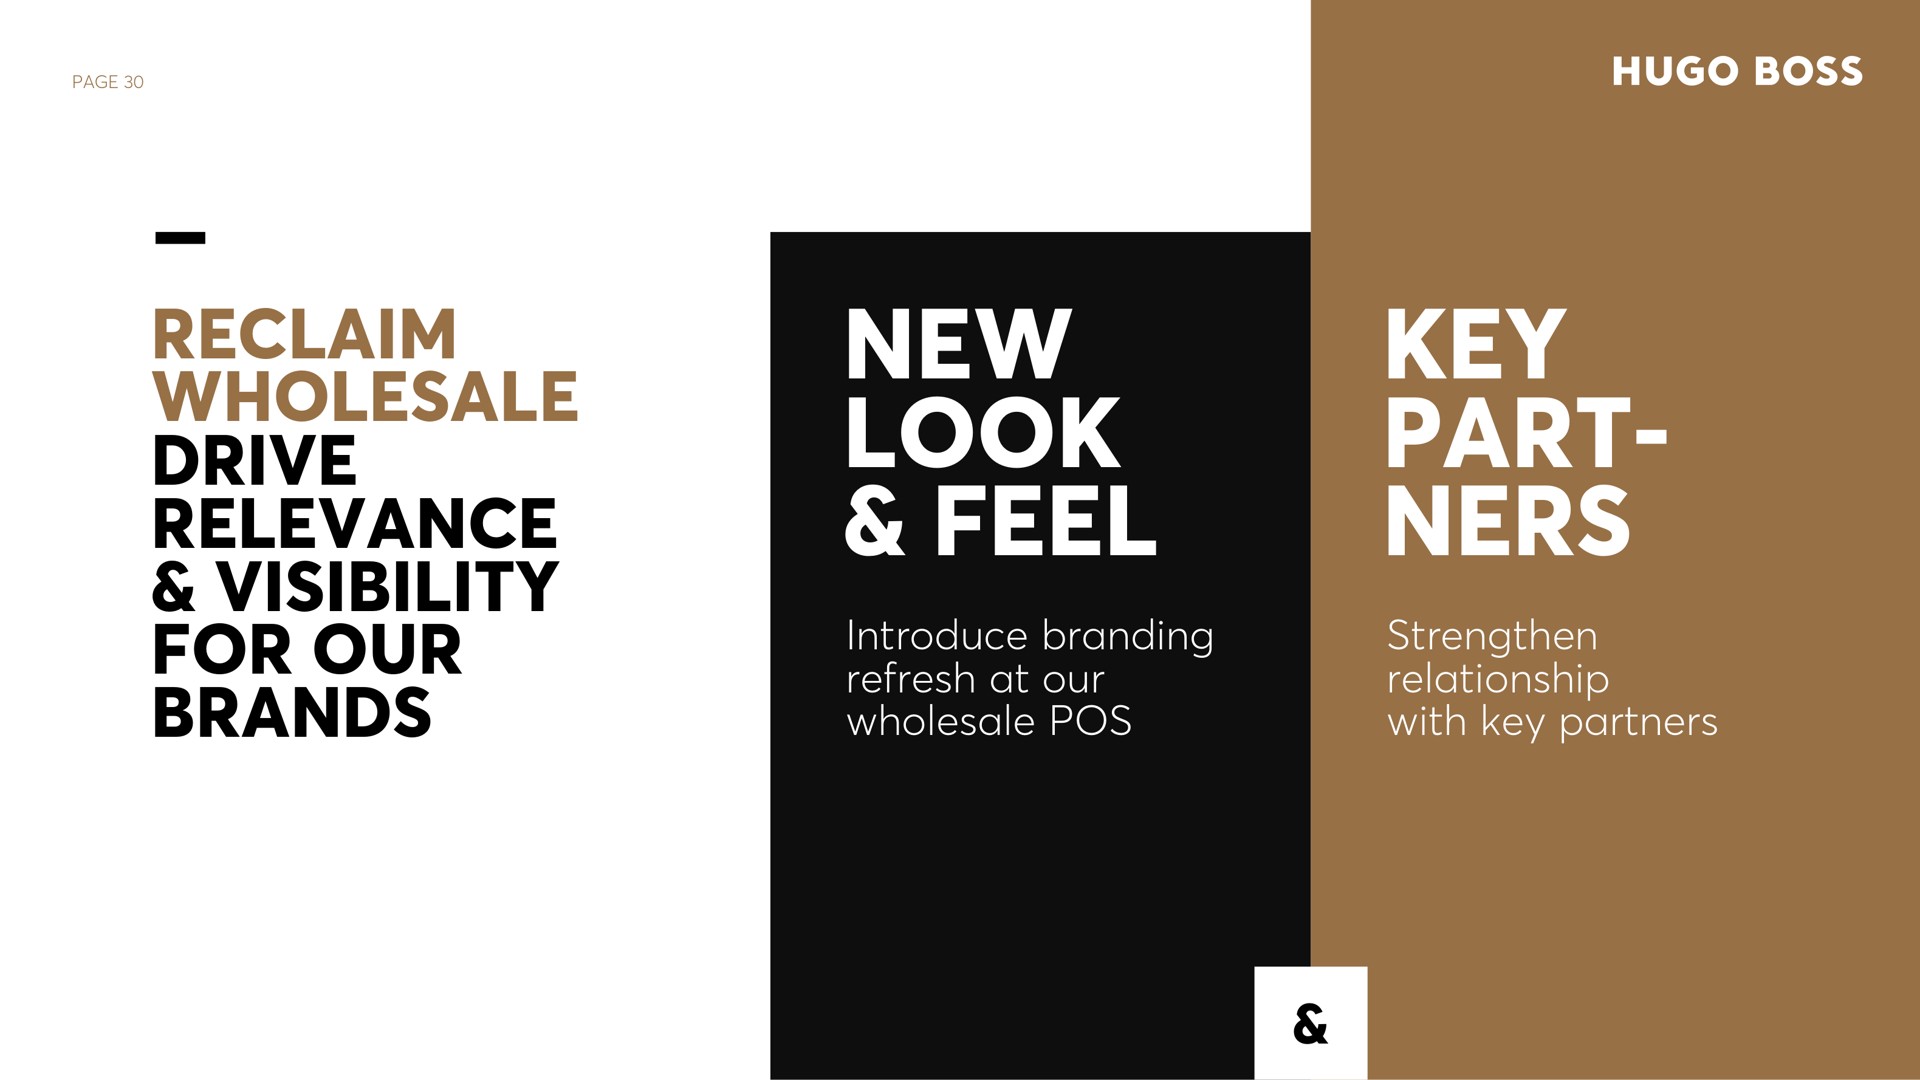 page i reclaim wholesale drive relevance visibility for our brands new look feel key part introduce branding refresh at our wholesale pos strengthen relationship with key partners a | Hugo Boss